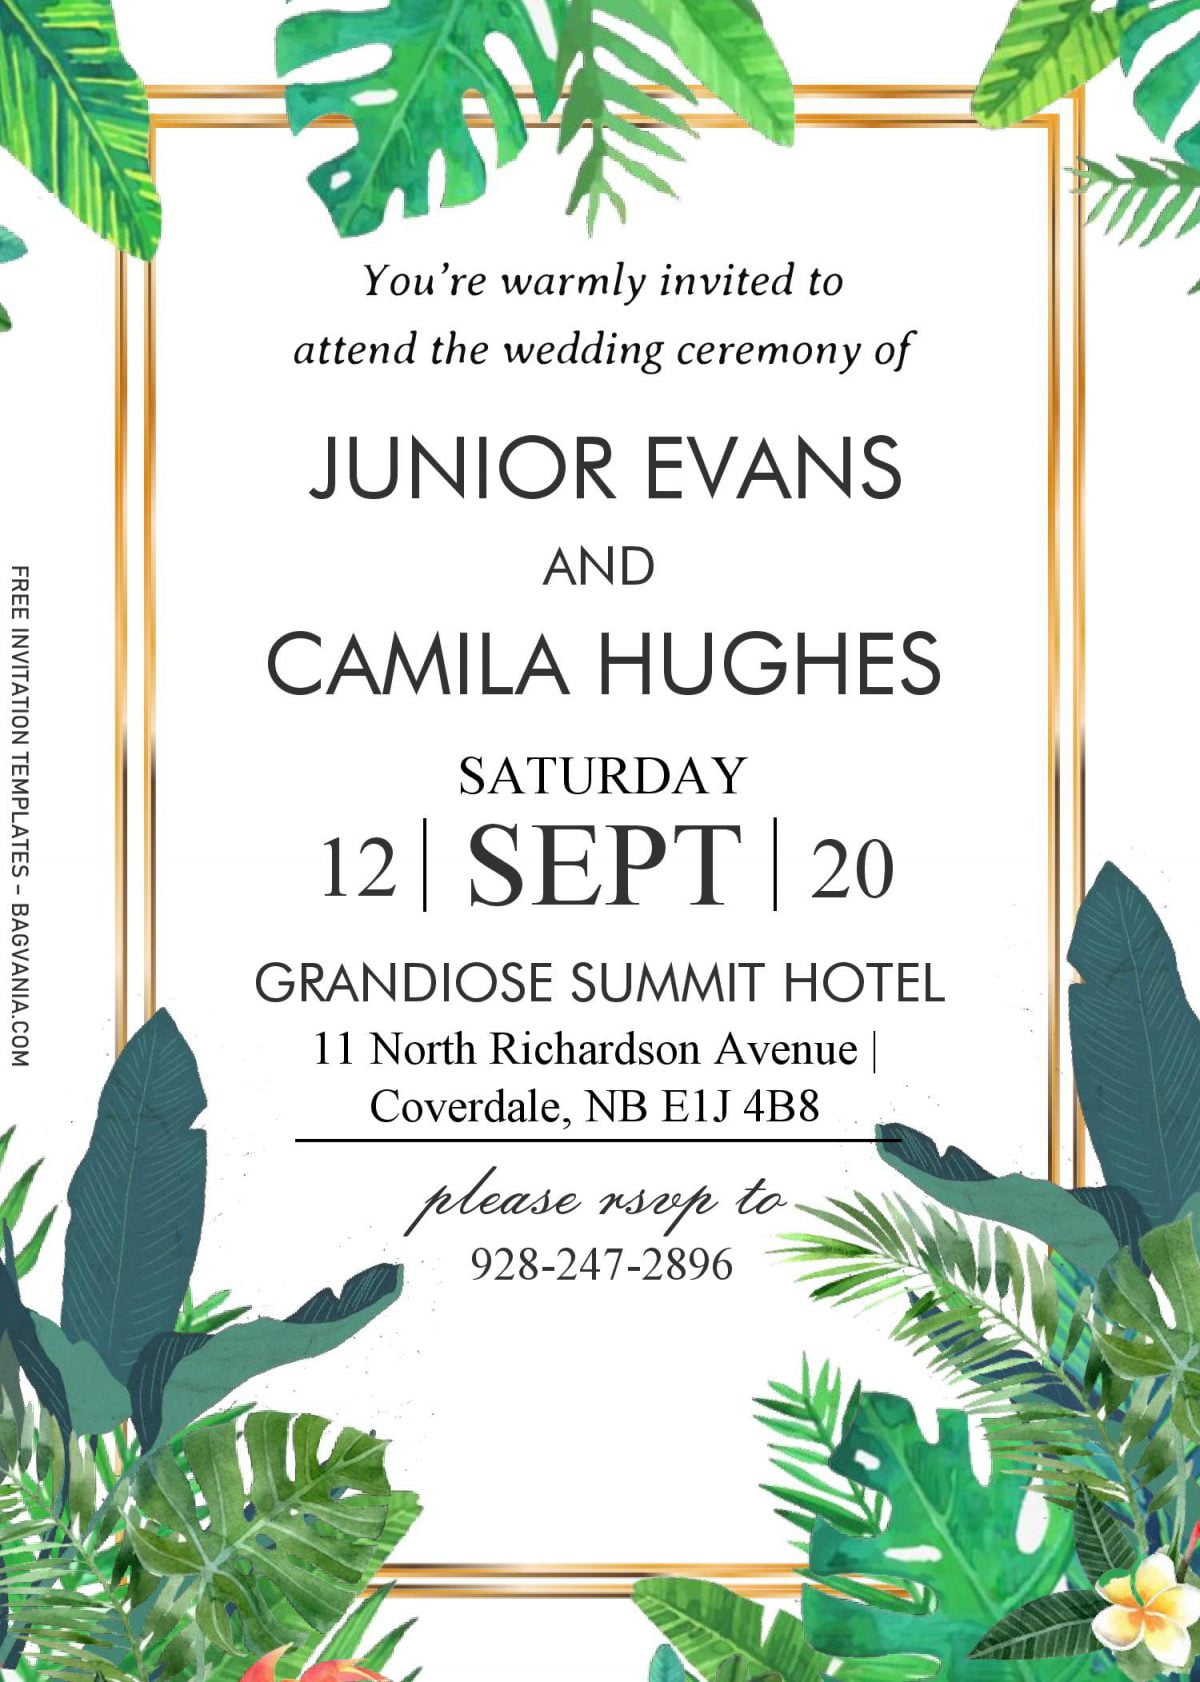 Tropical Leaves Invitation Templates - Editable With MS Word and has aesthetic fonts